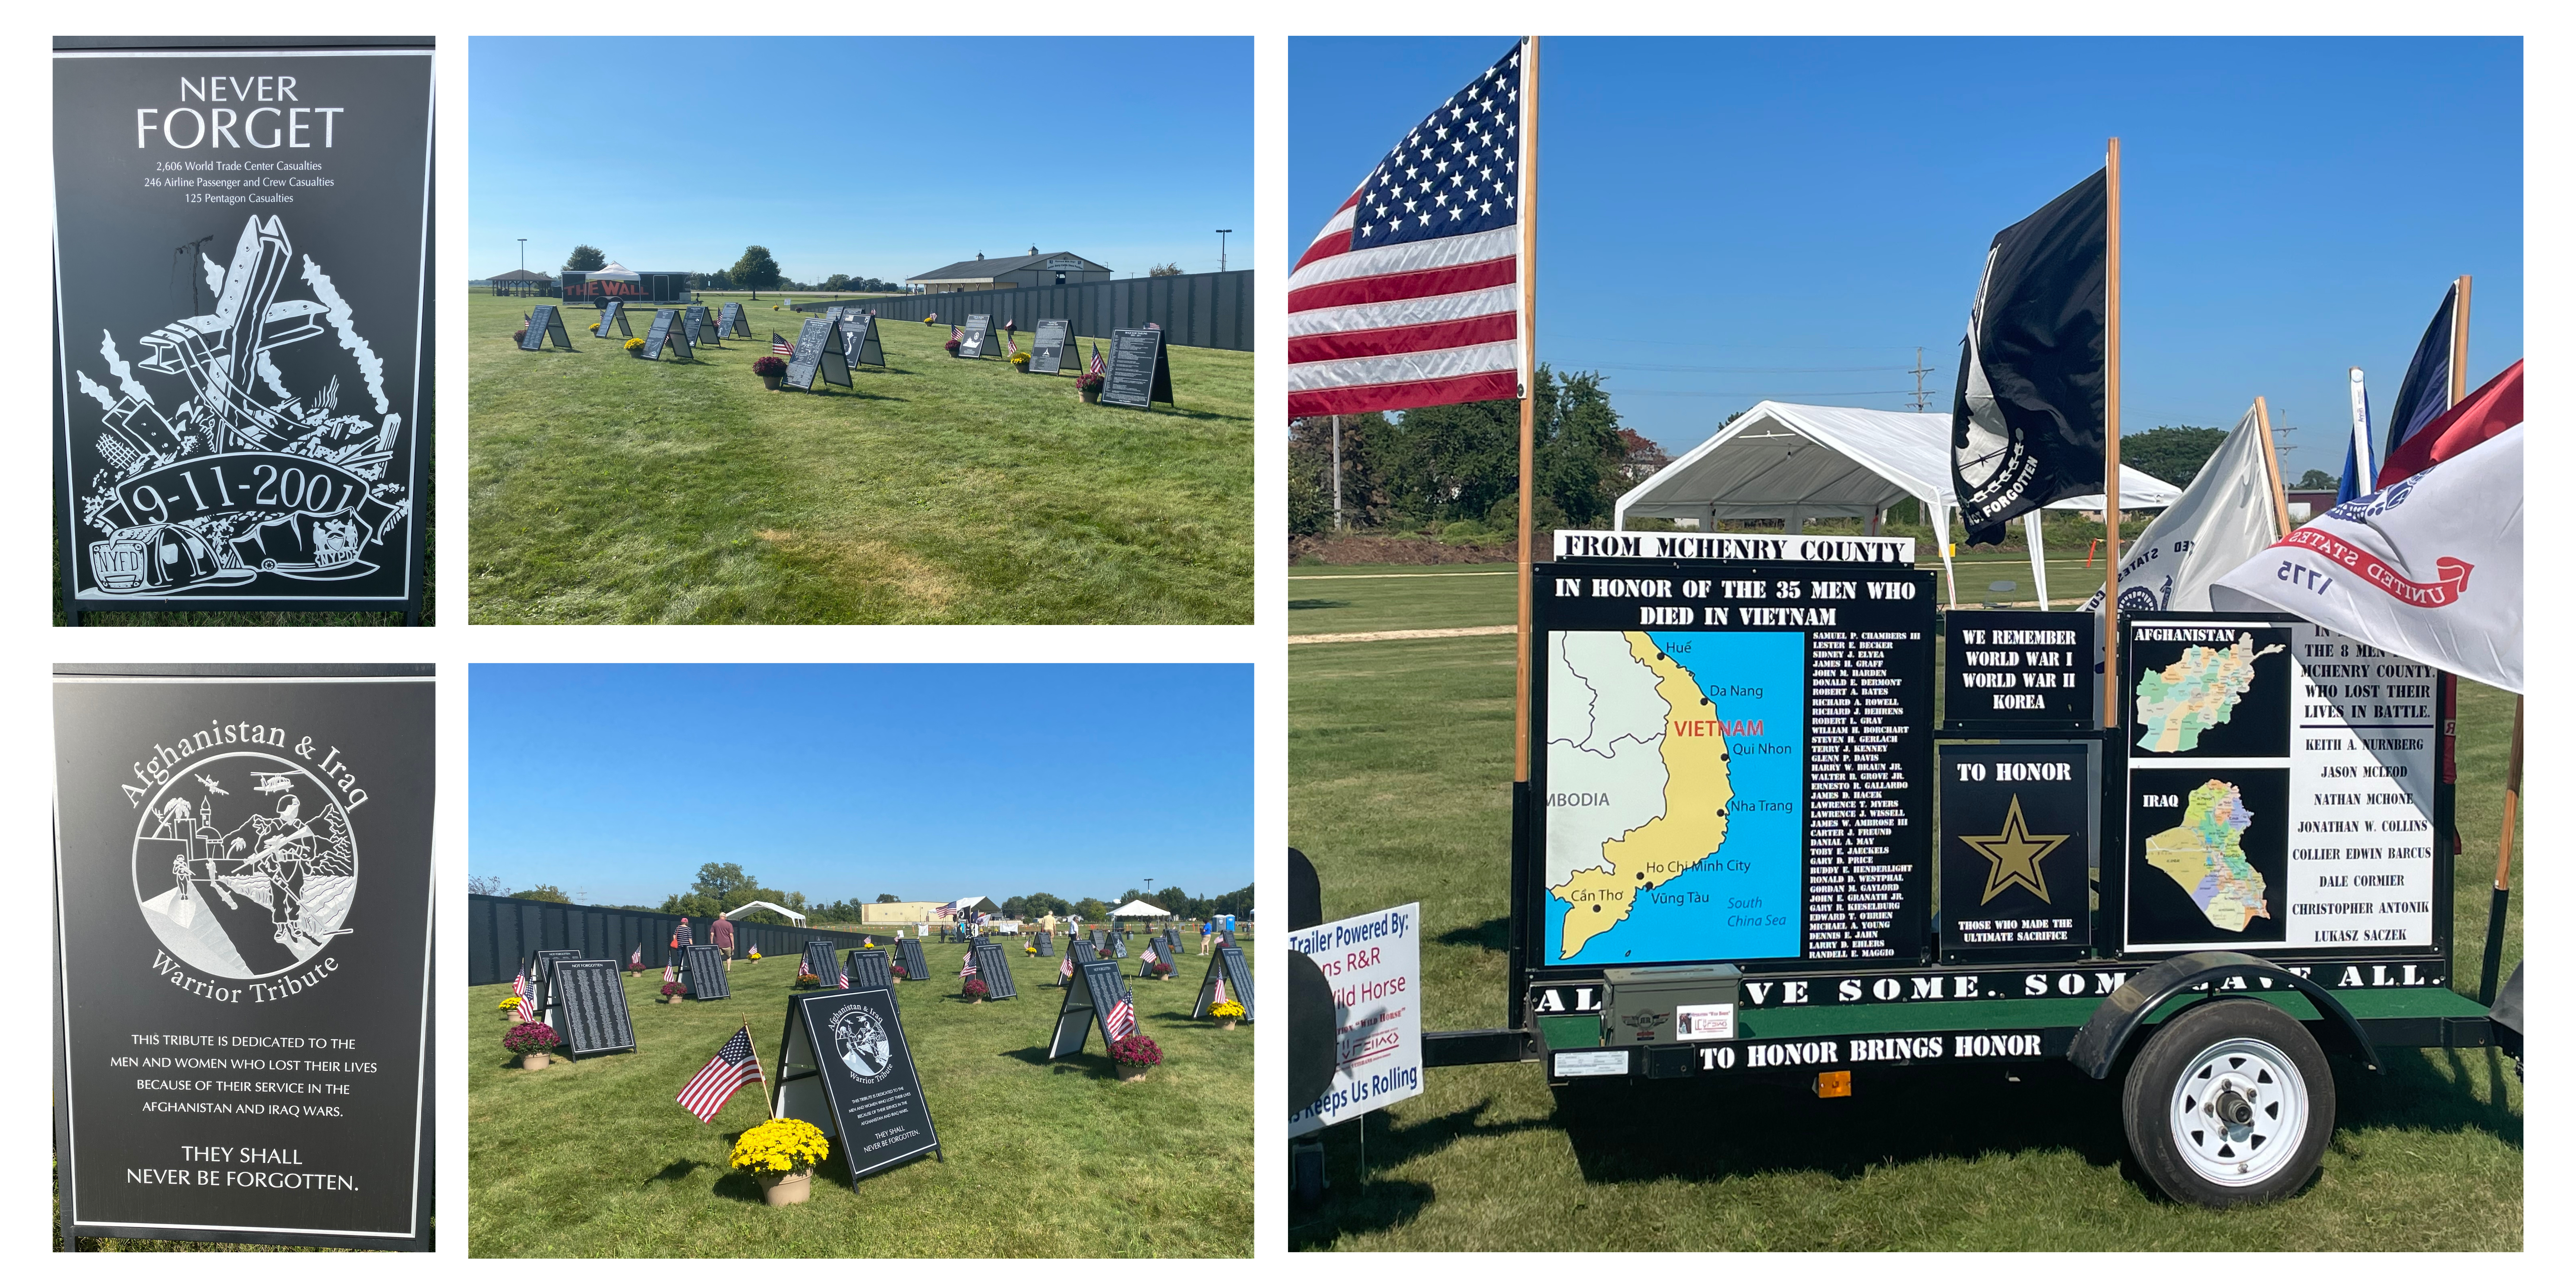 The American Veterans Traveling Tribute also provides information about 9-11 and the wars in Afghanistan and Iraq. In addition, the names of fallen veterans from McHenry County (right) who served in various wars throughout history provide a local reminder of those who gave their life for their country.